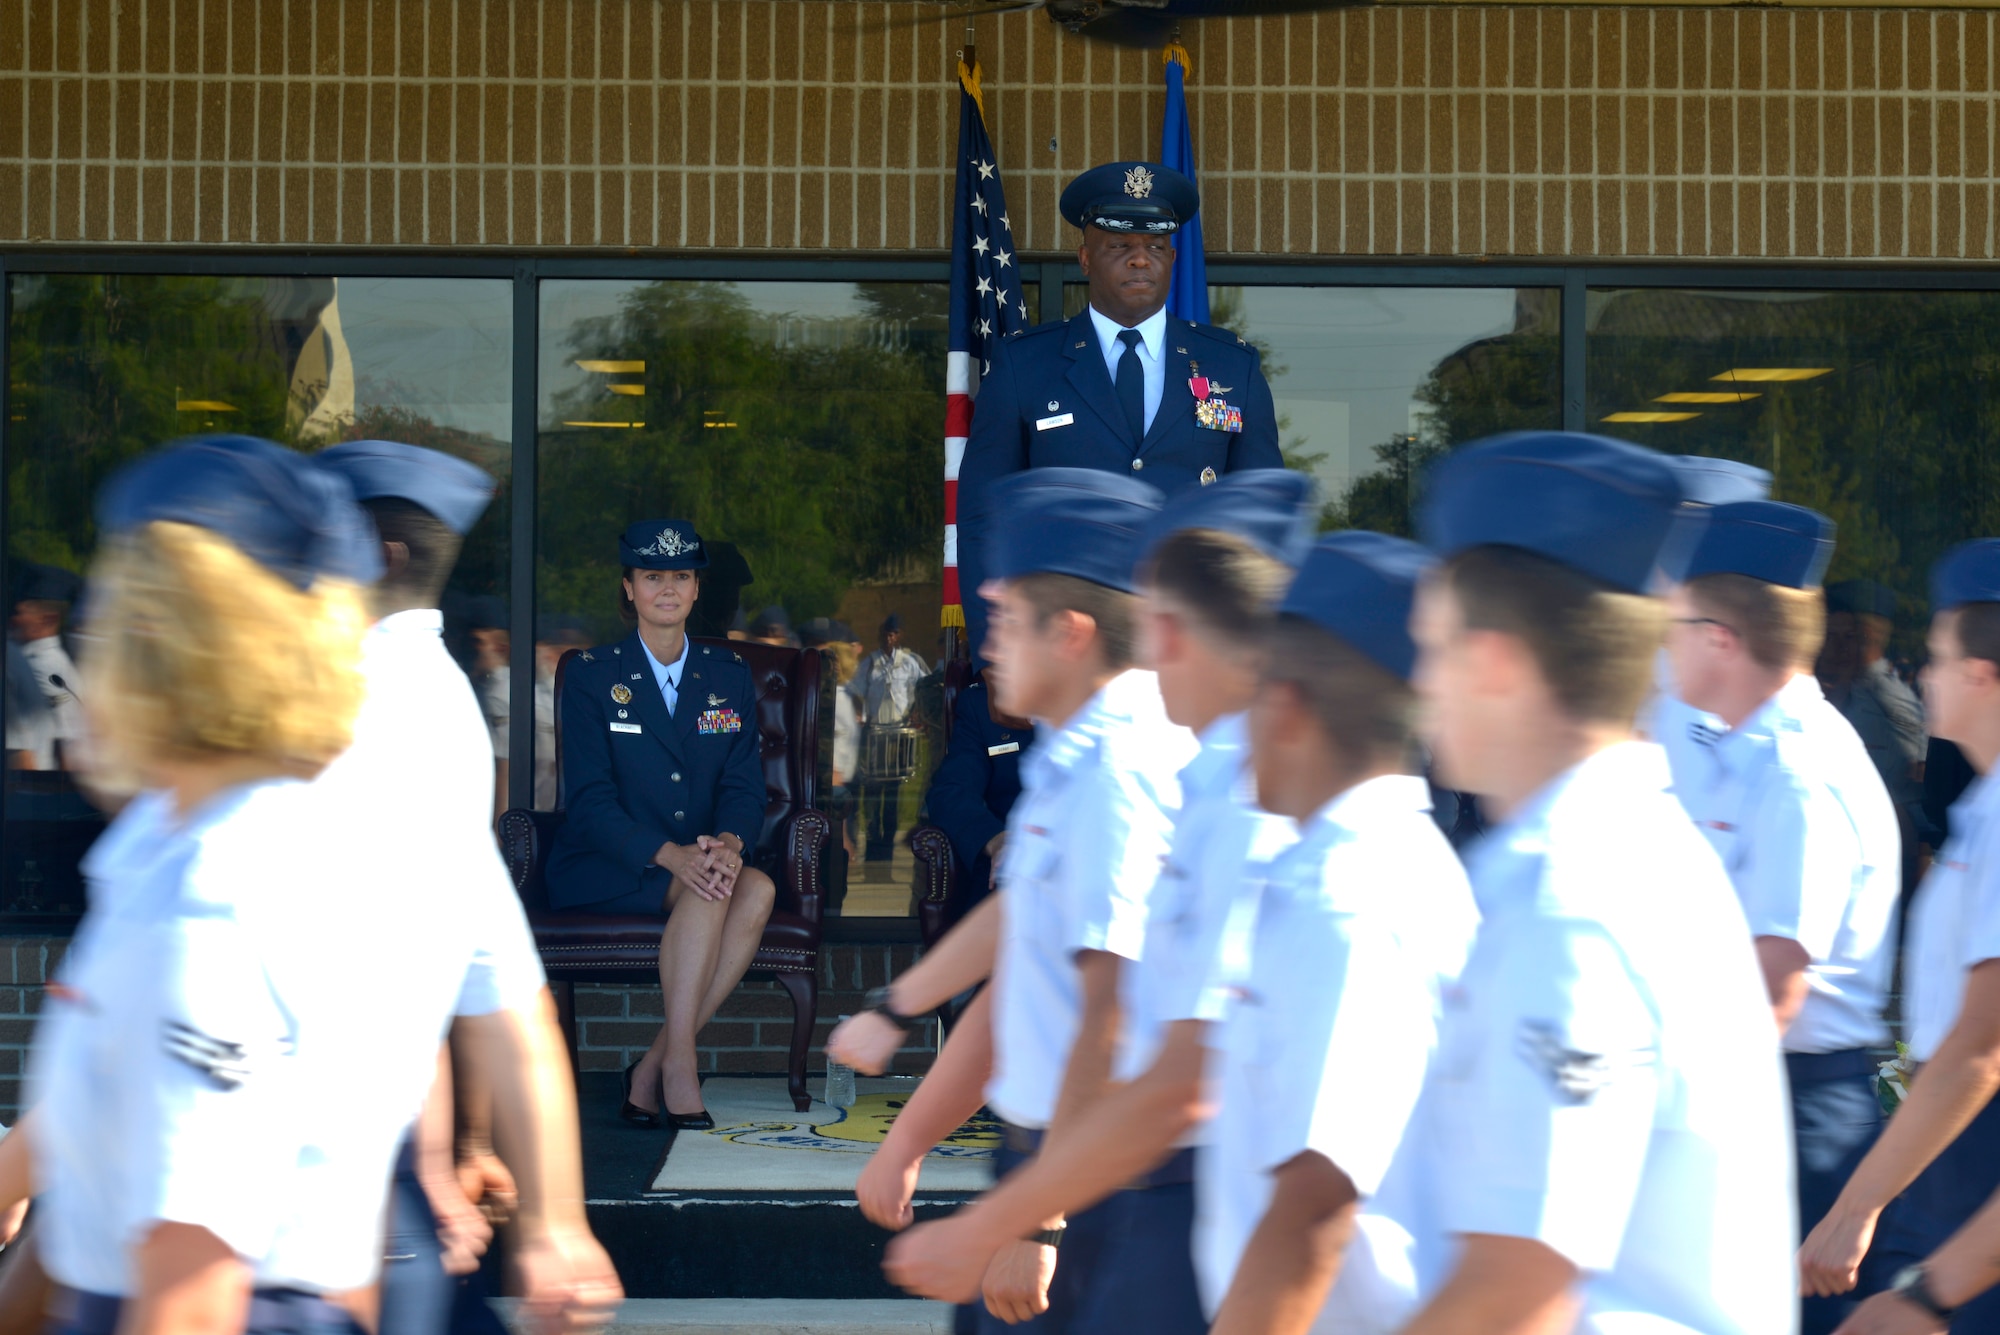 U.S. Air Force Col. Heather Blackwell, 81st Training Wing commander, and Col. Leo Lawson Jr., outgoing 81st Training Group commander, watch Airmen march in formation during the 81st TRG change of command ceremony at the Levitow Training Support Facility drill pad at Keesler Air Force Base, Mississippi, July 1, 2019. The ceremony is a symbol of command being exchanged from one commander to the next. Lawson passed command of the 81st TRG to Col. Chance Geray, incoming 81st TRG commander. (U.S. Air Force photo by Airman Seth Haddix)